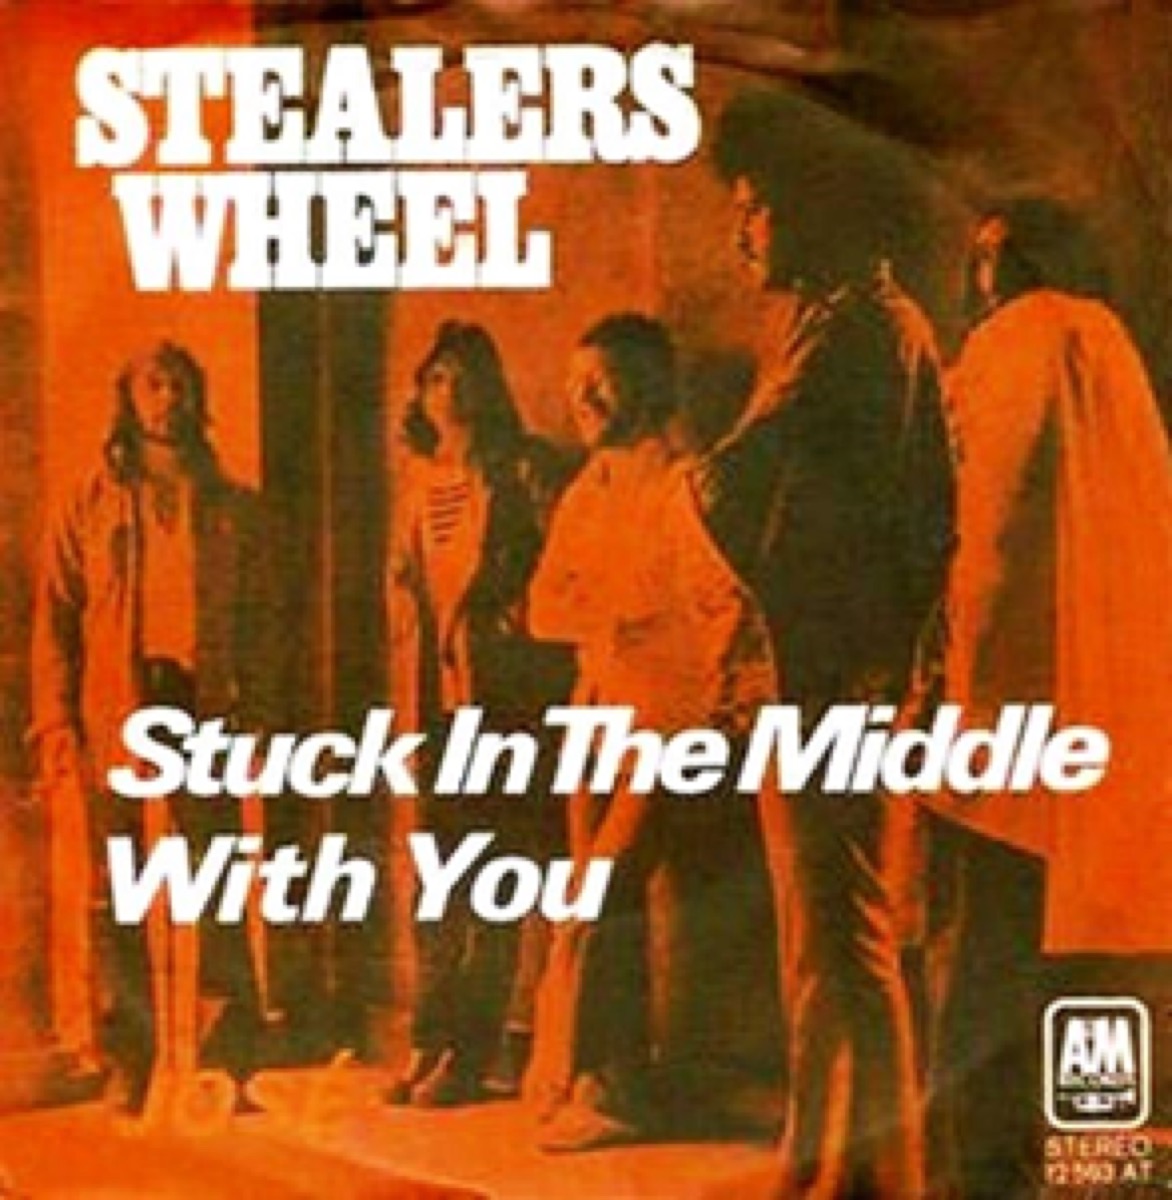 Stuck in the Middle With You, 1970s one hit wonder